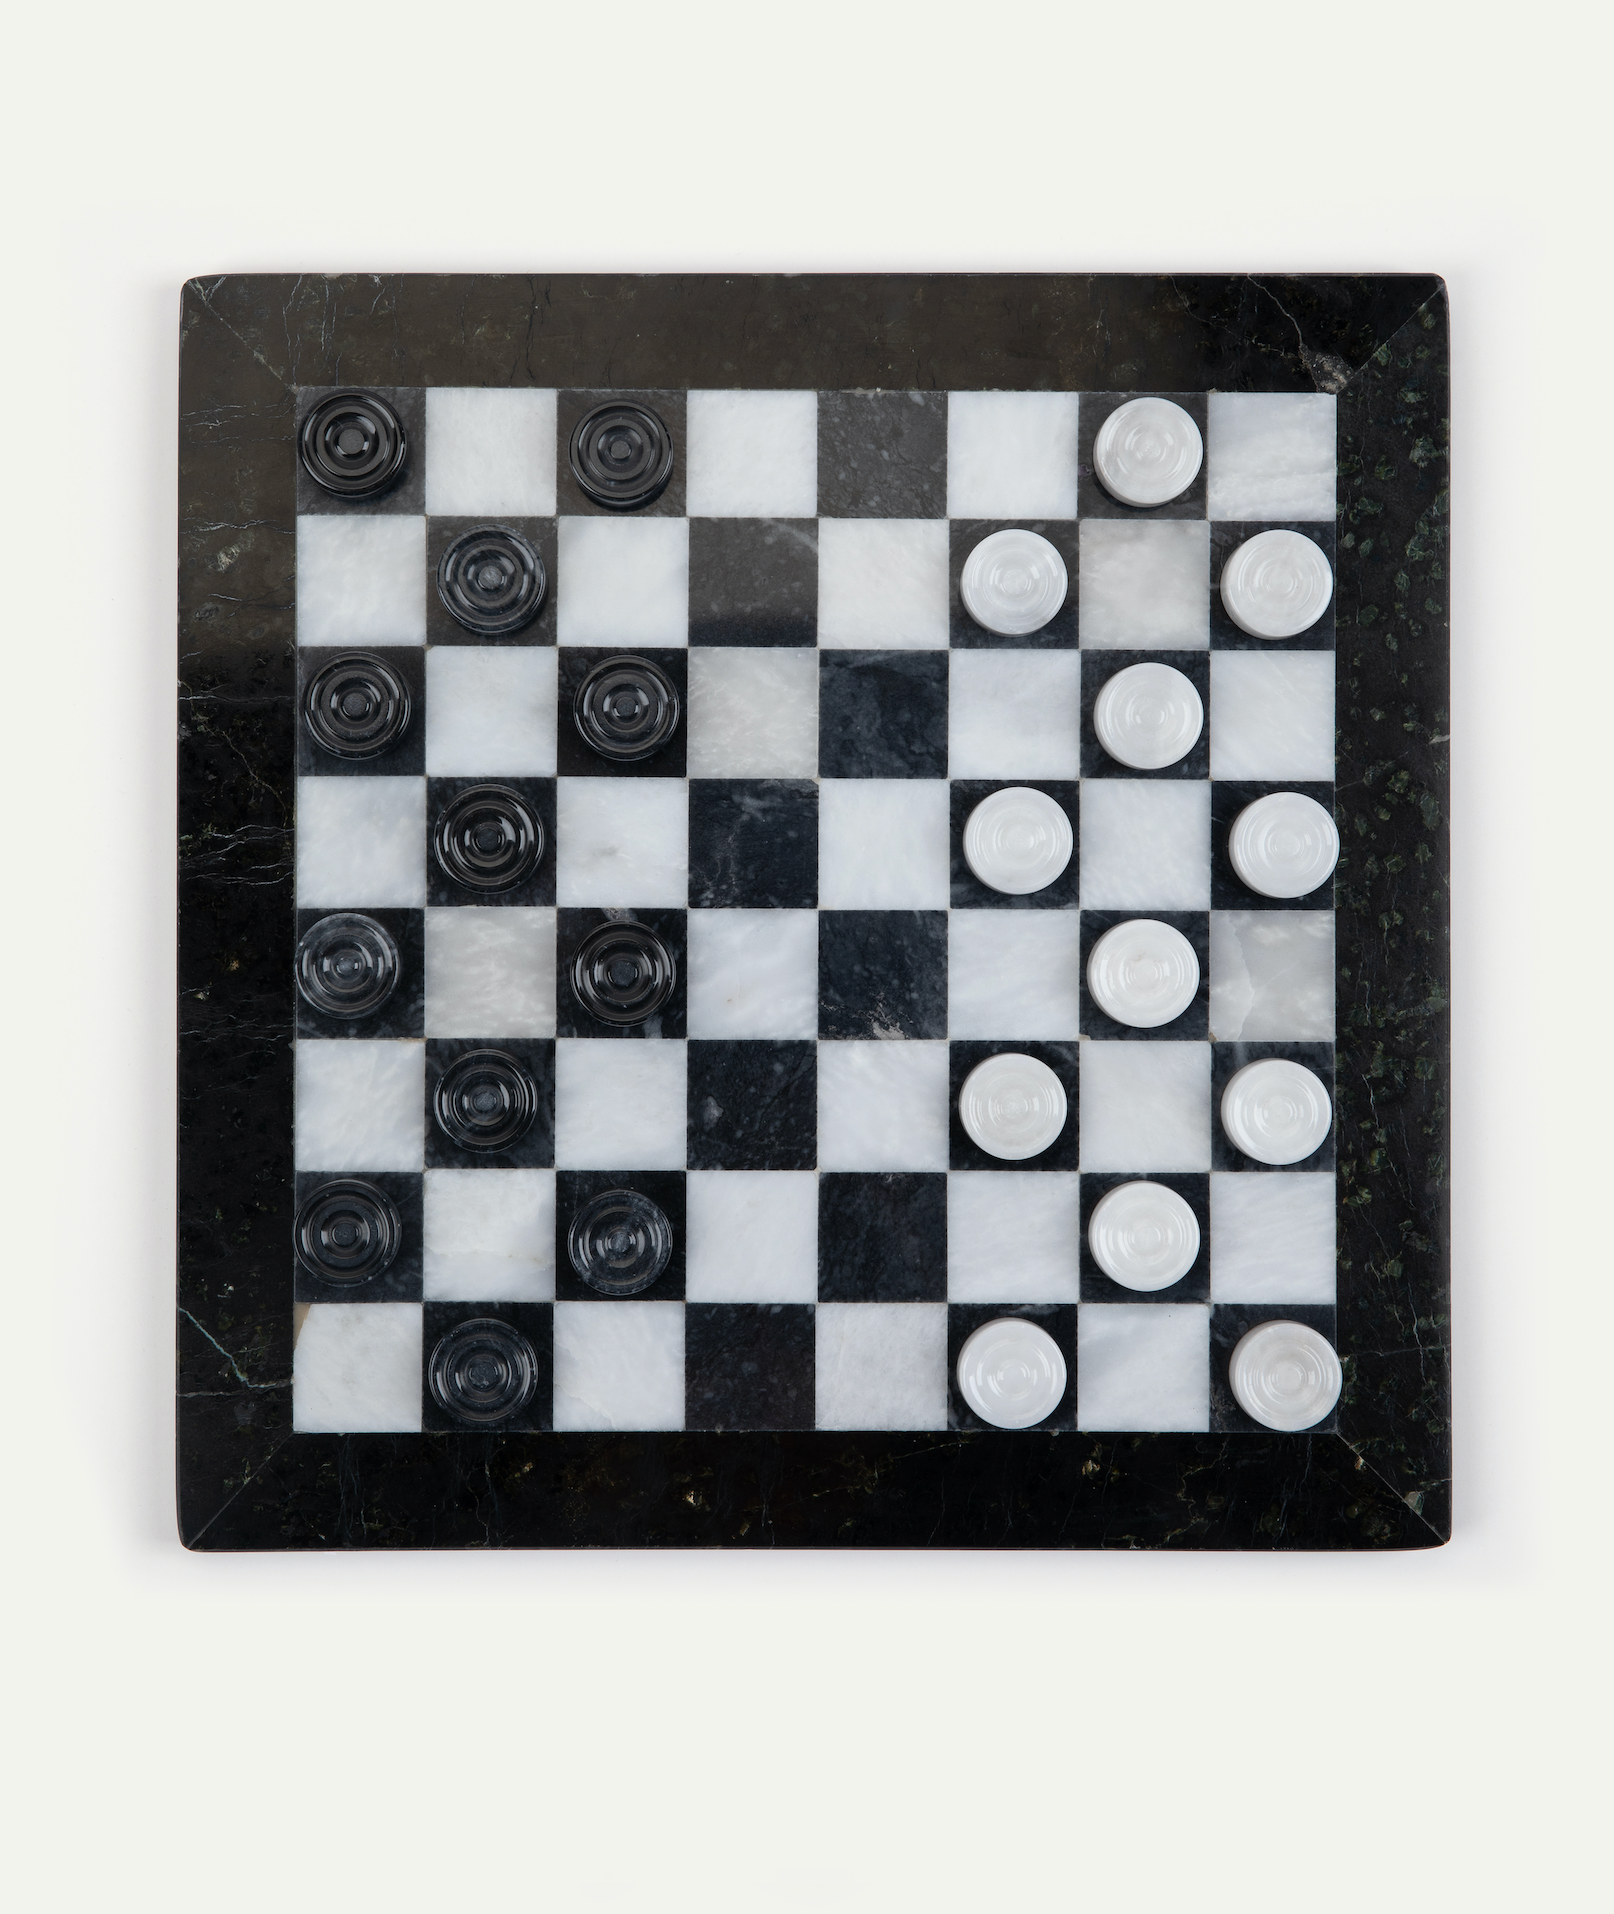 Black & White Marble Draughts shown on our Monochrome Playing Board